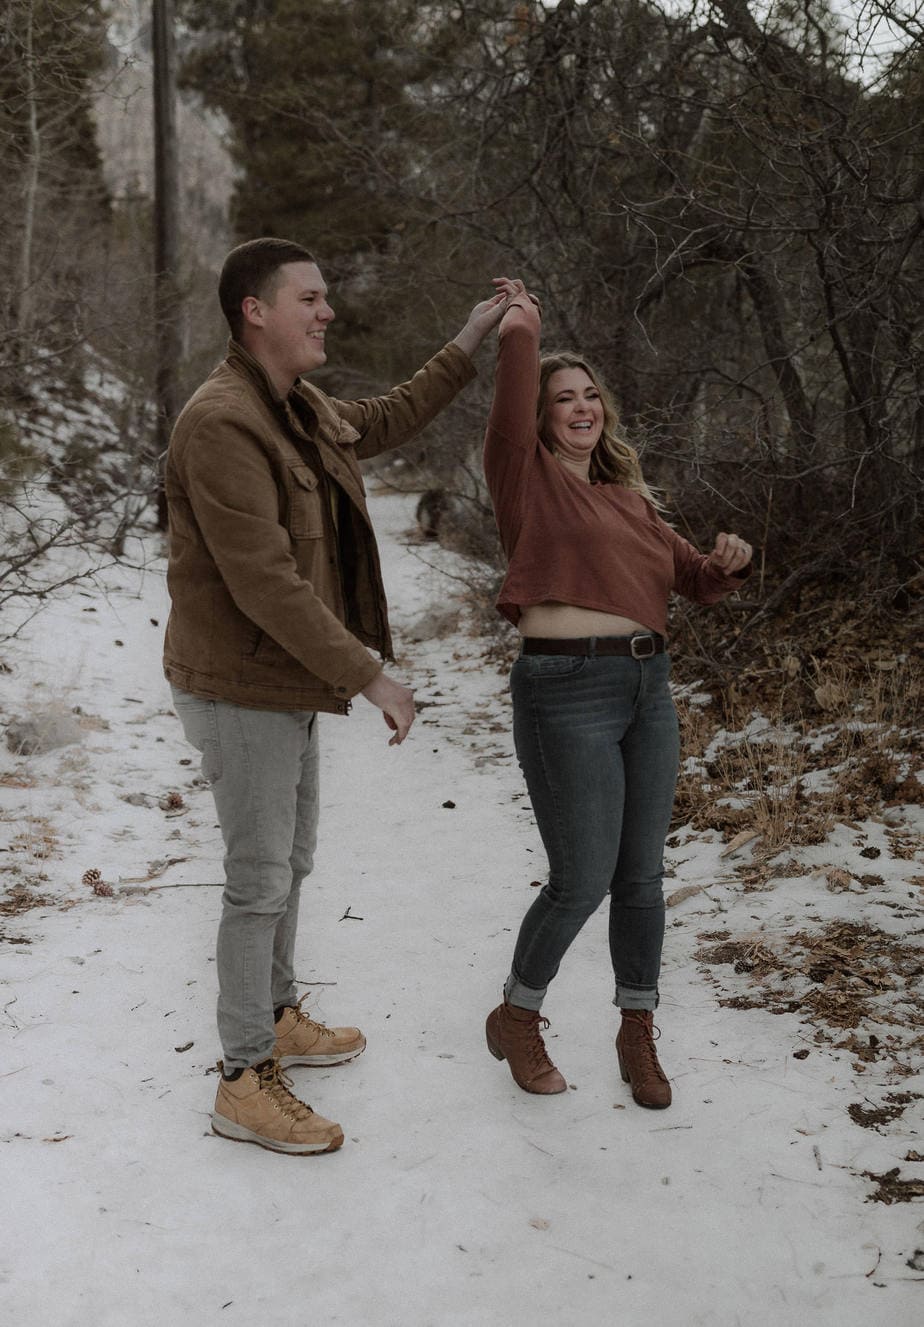 Playful engagement session in the mountains with snow everywhere. Winter engagement sessions don't have to be boring!